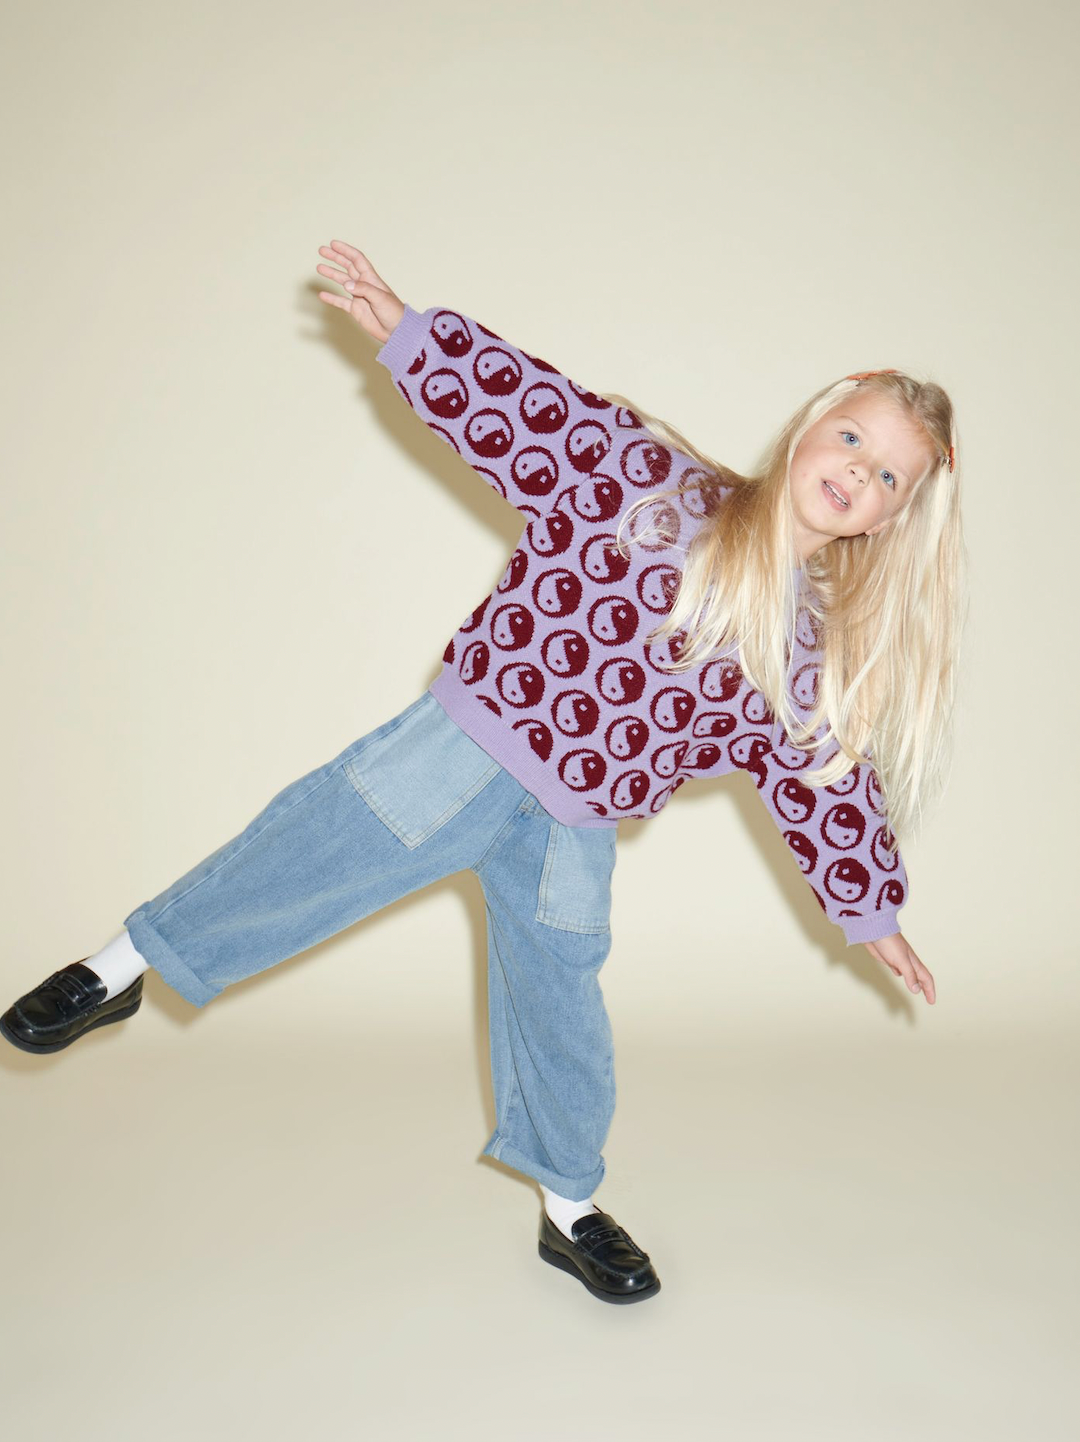 A child wearing a kids' sweater with dark red yin and yang circles on a violet background